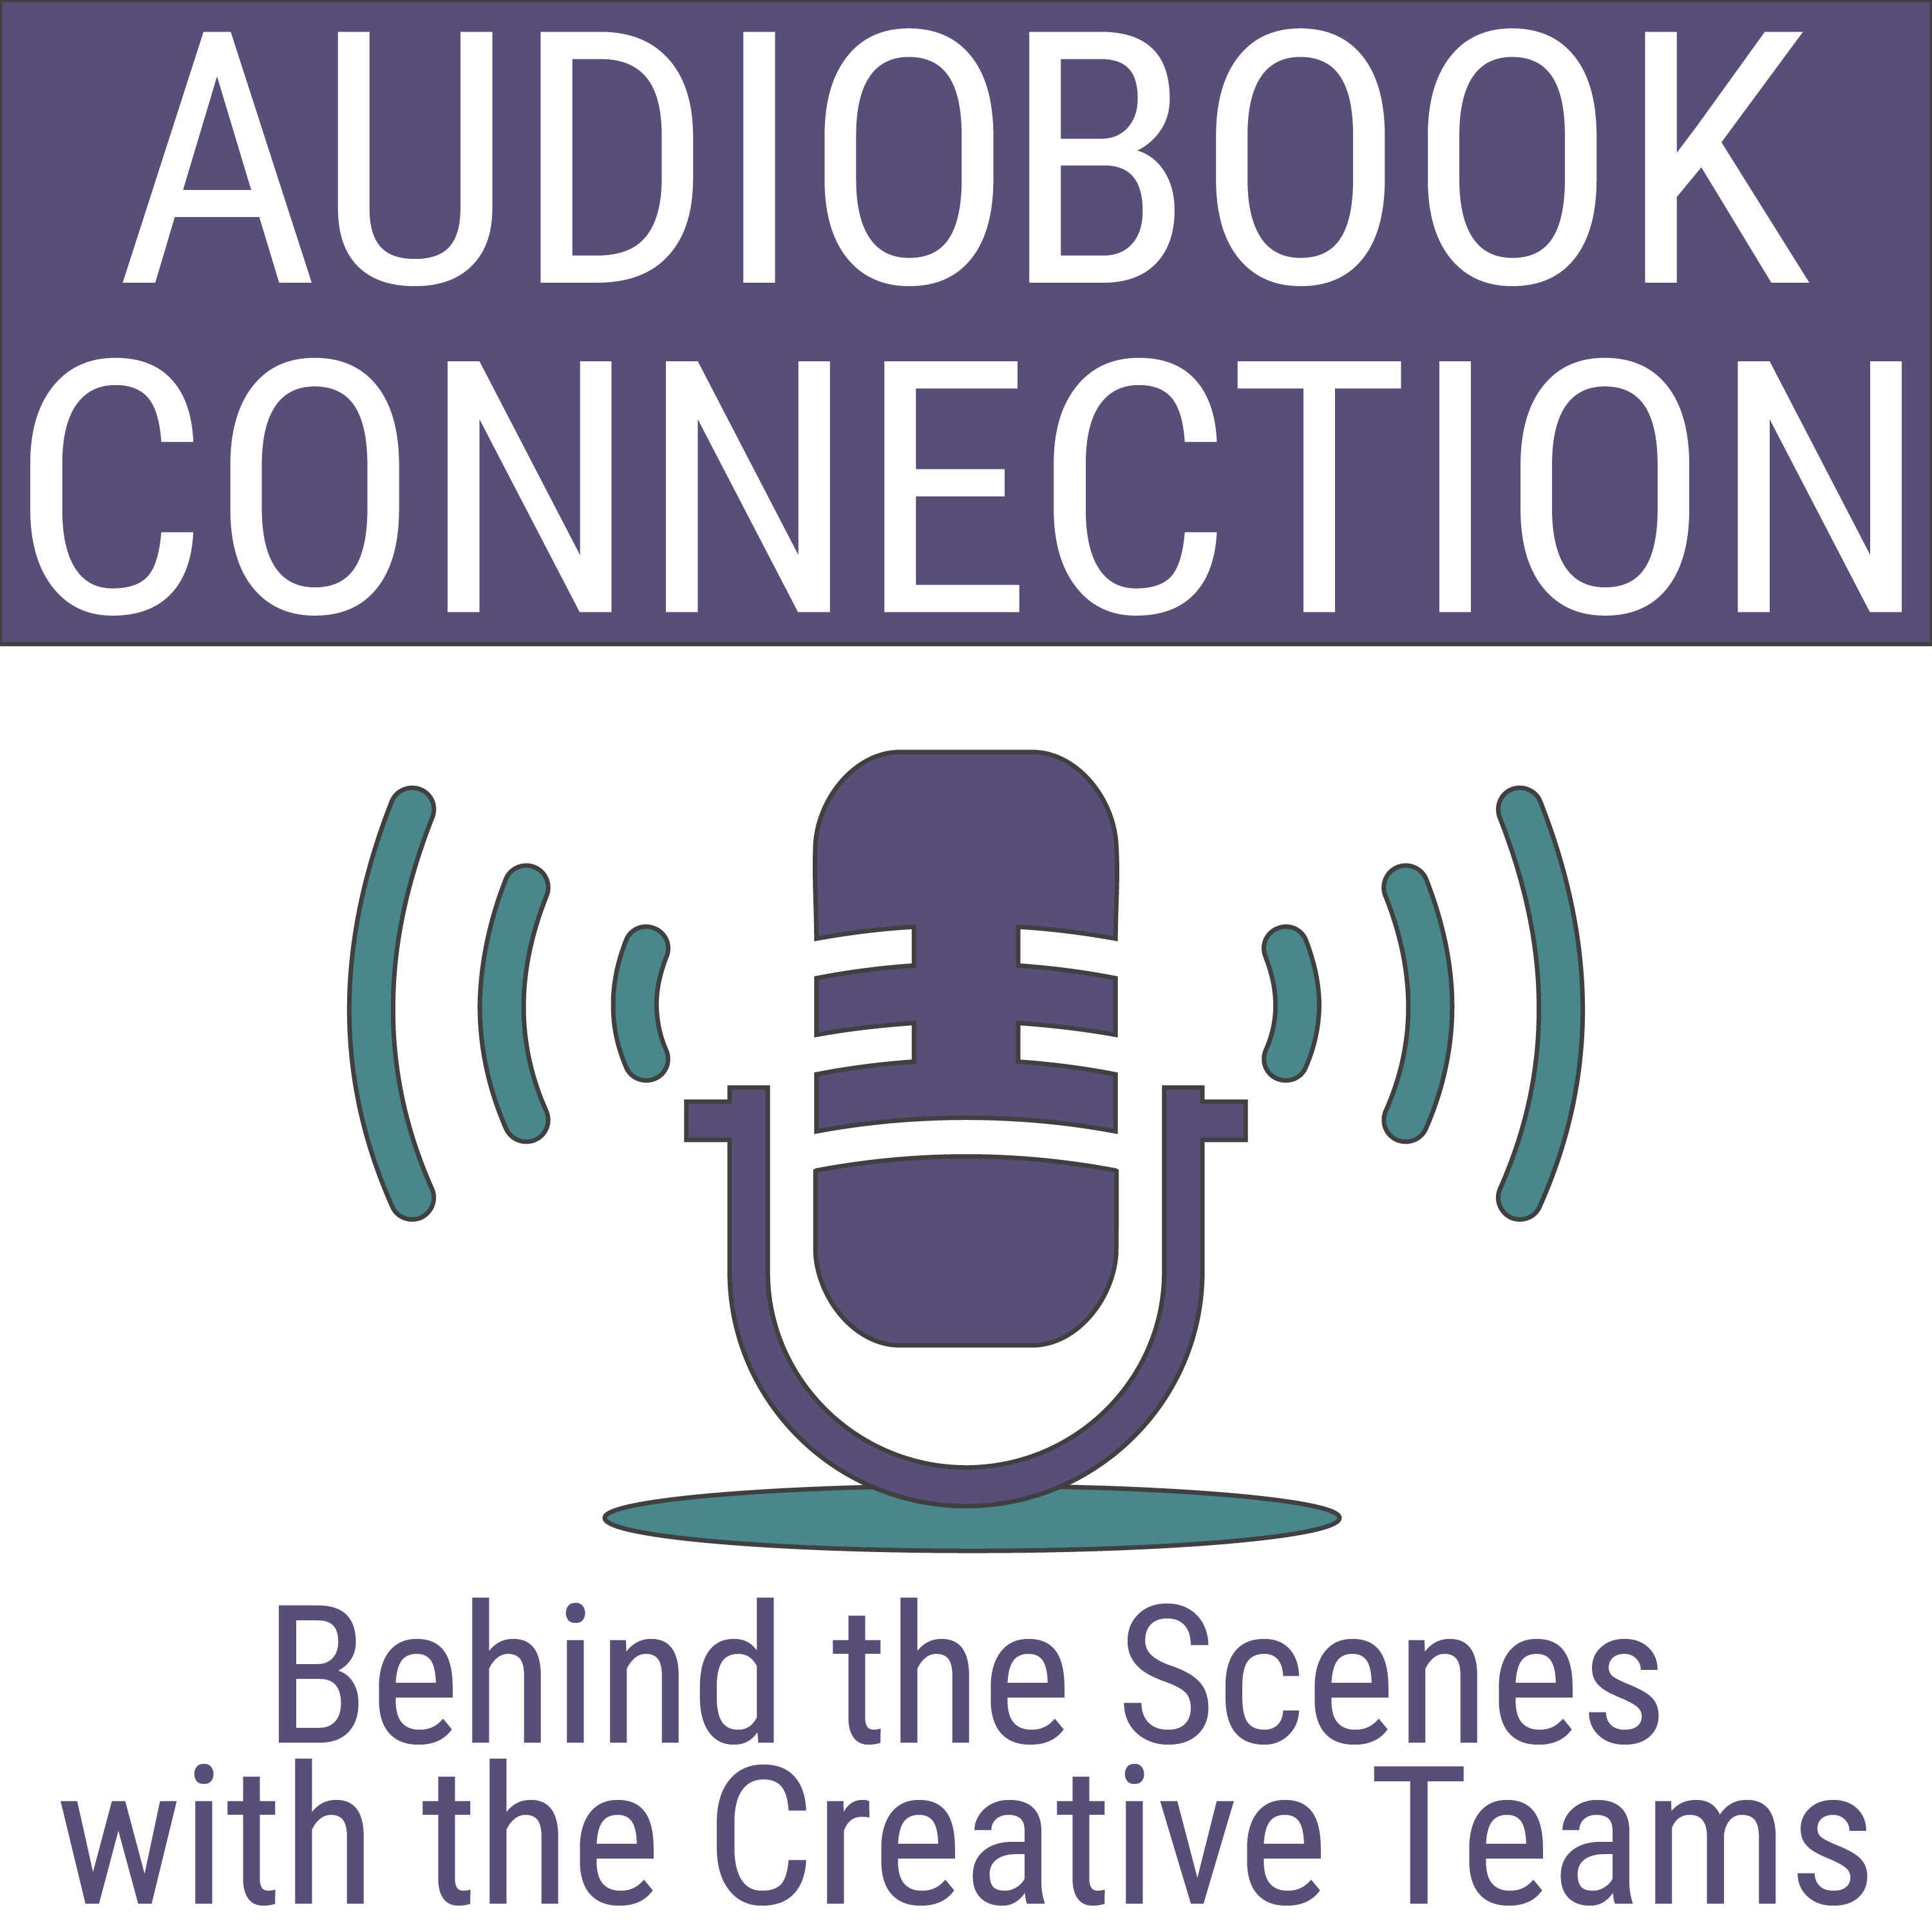 Audio Book Connection – Behind the Scenes with the Creative Teams